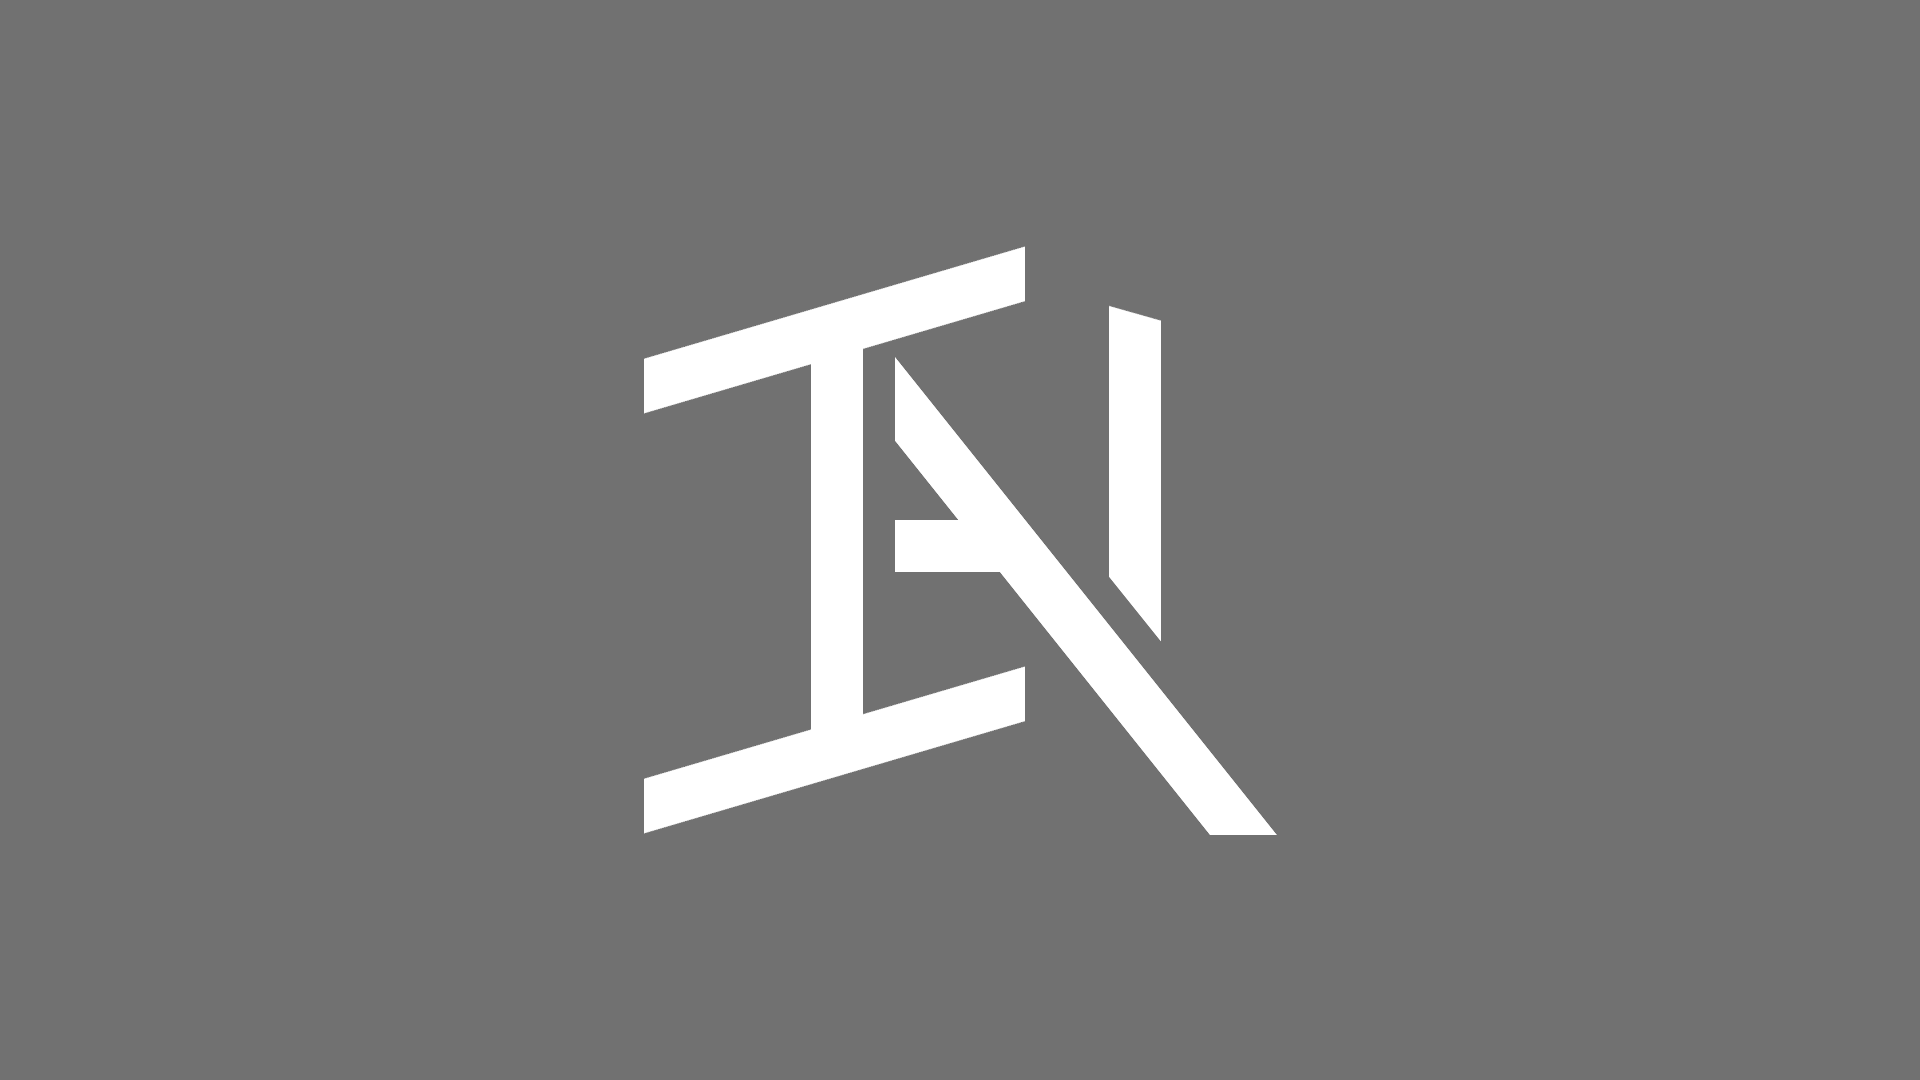 Ian Logo - Wanting to make a personal logo for (mostly) youtube use. Any tips ...